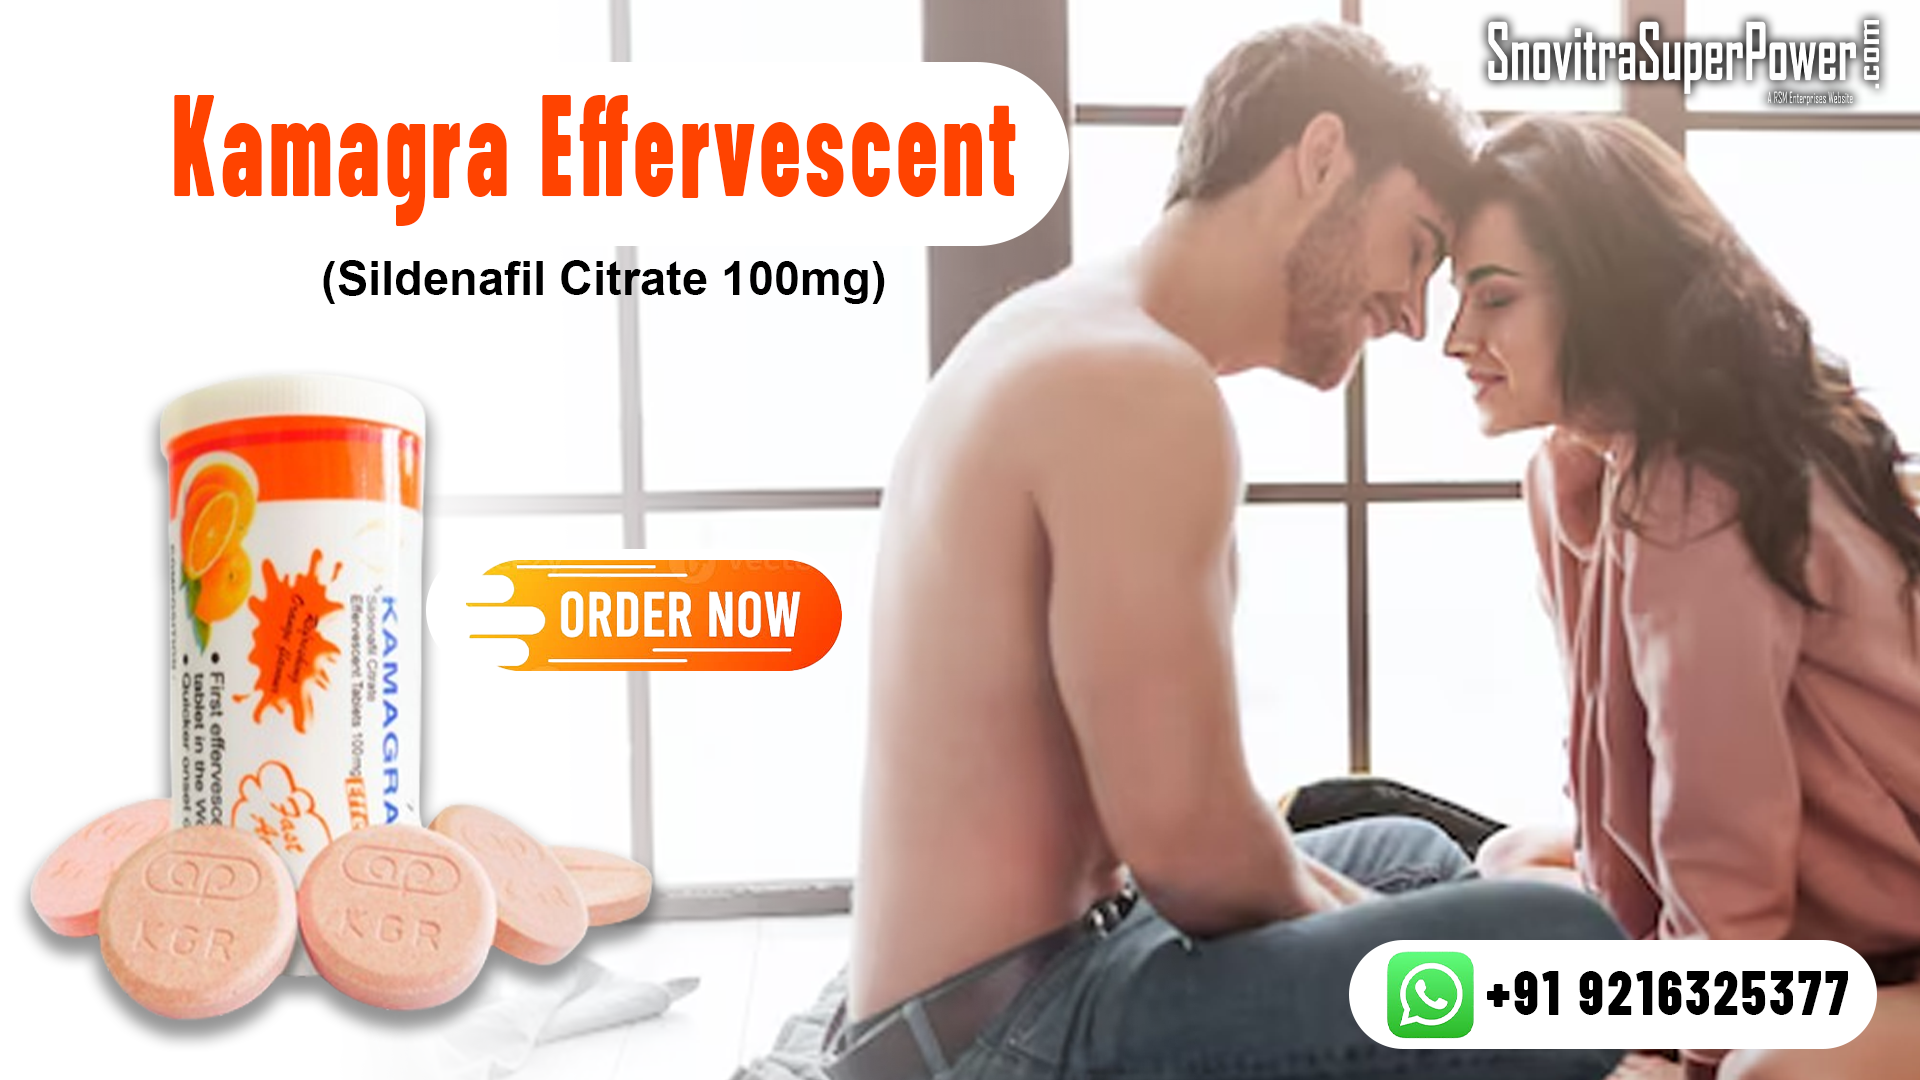 Kamagra Effervescent The Best Remedy for the Problem of Erection Failure